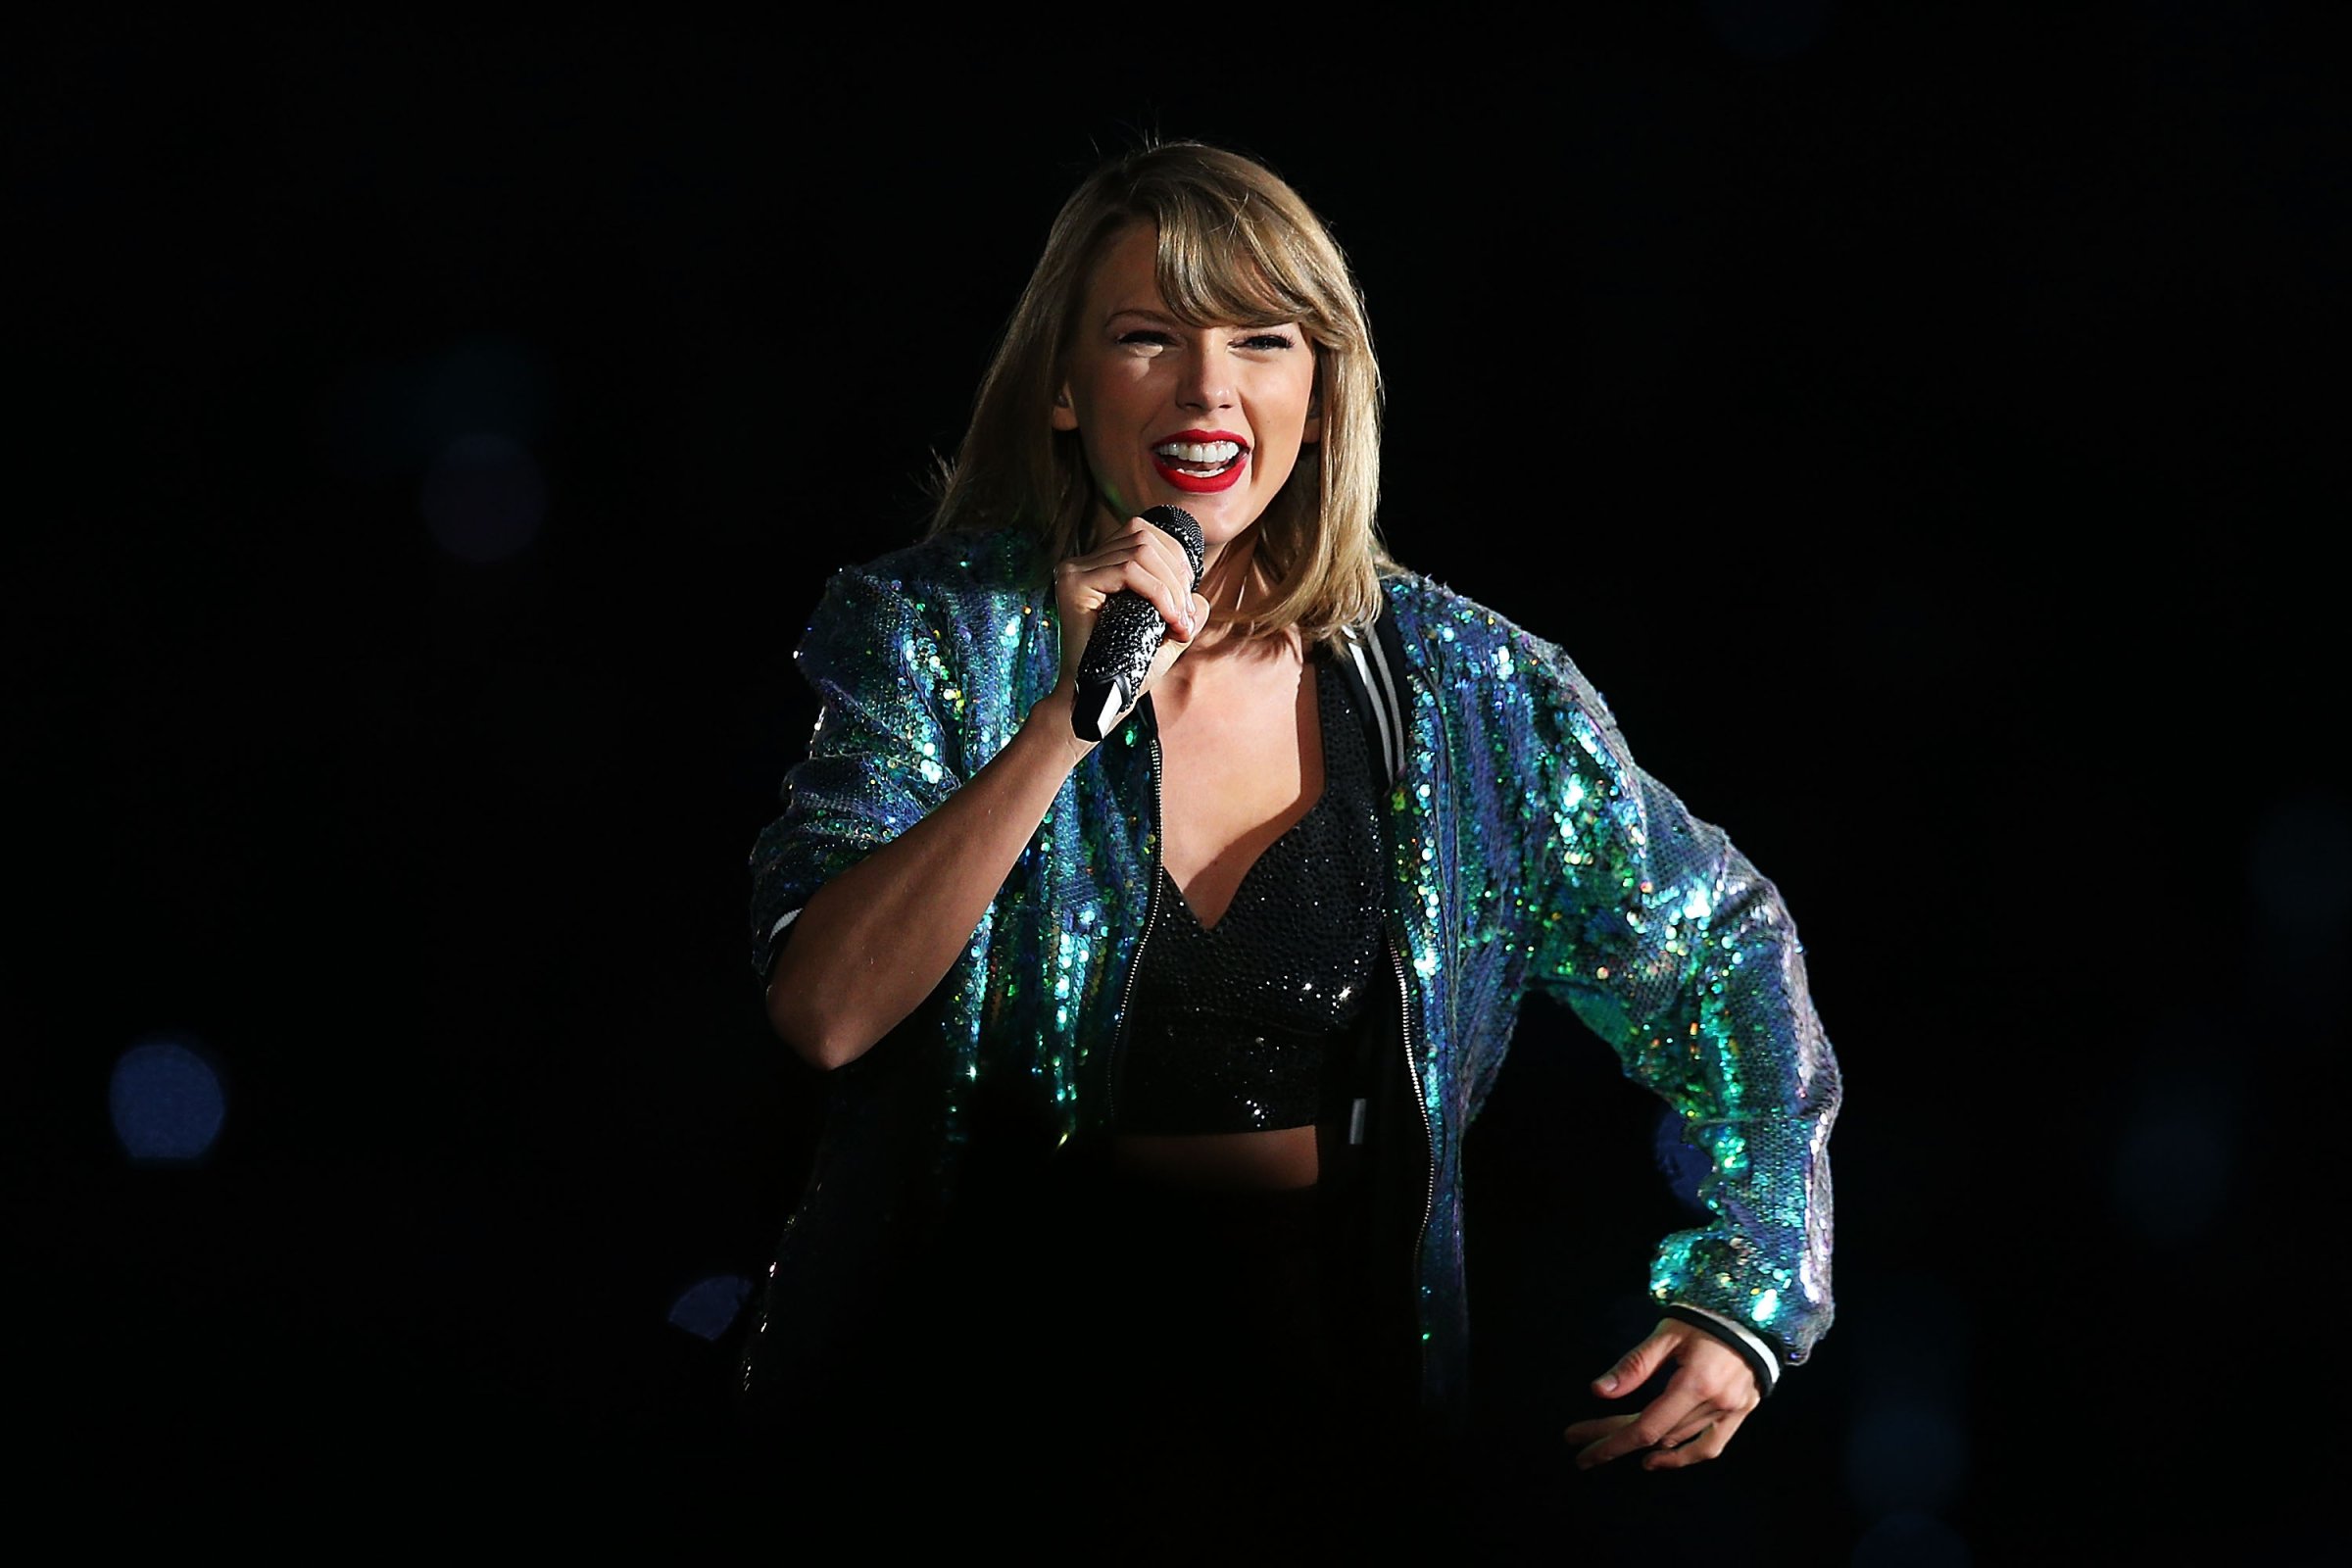 Taylor Swift performs during her '1989' World Tour at AAMI Park on Dec. 10 in Melbourne, Australia.